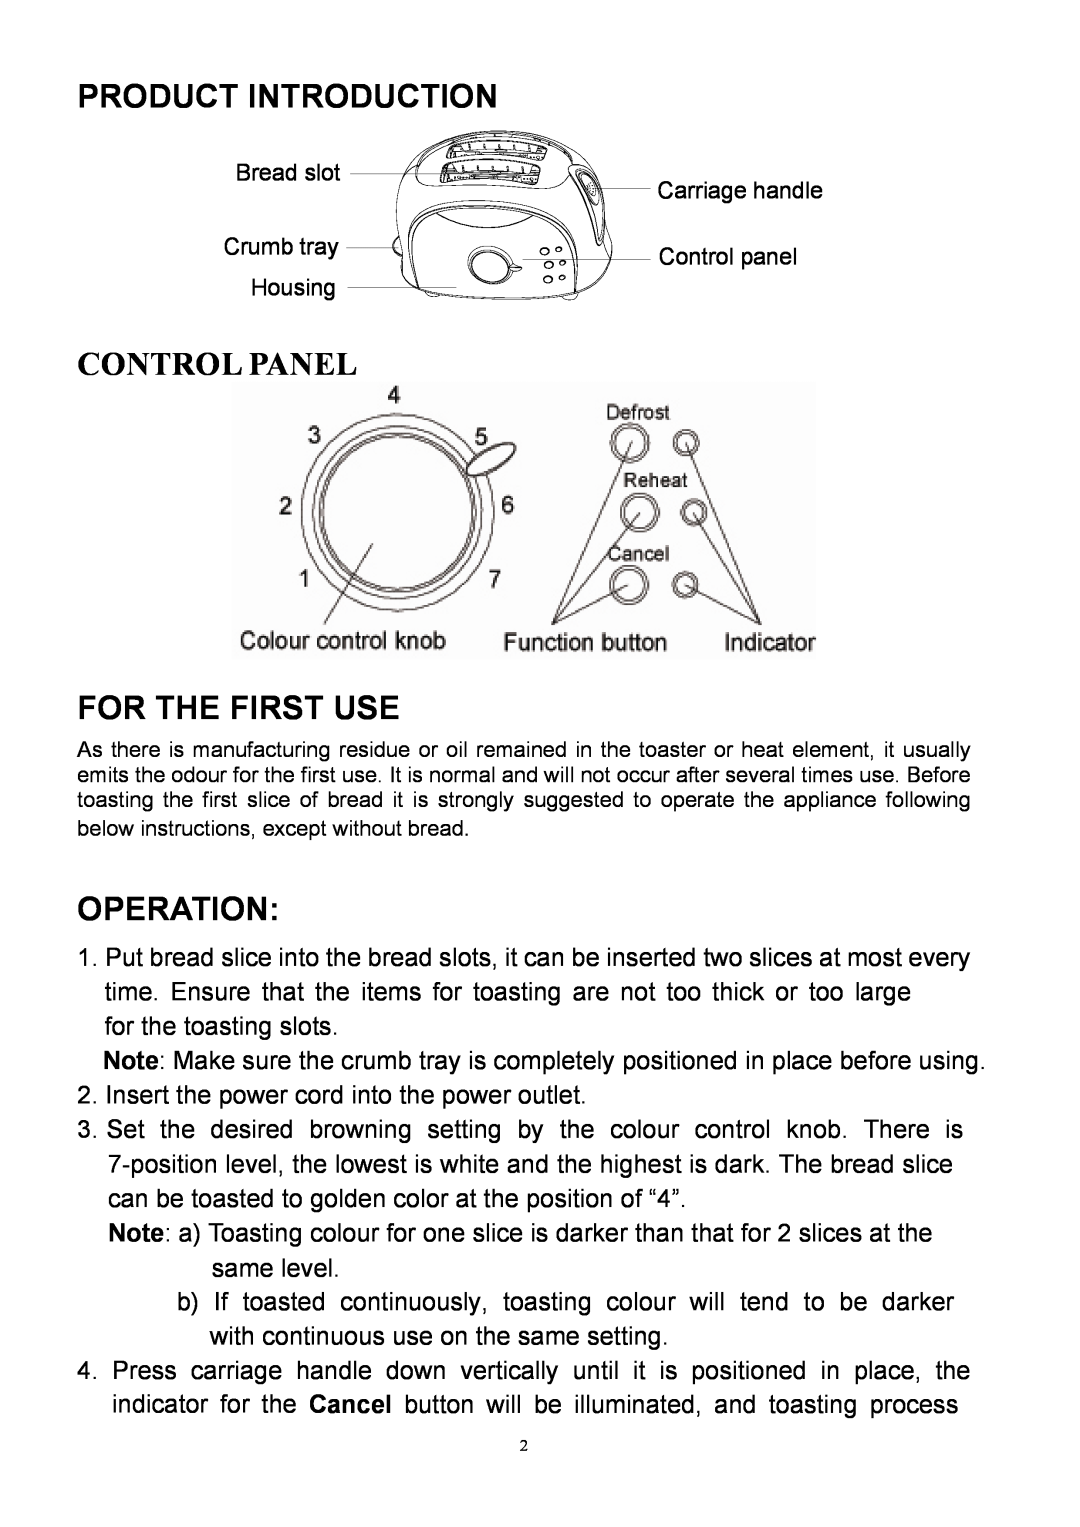 Sharp KZ-2S01SS manual Product Introduction, For The First Use, Operation, Control Panel 